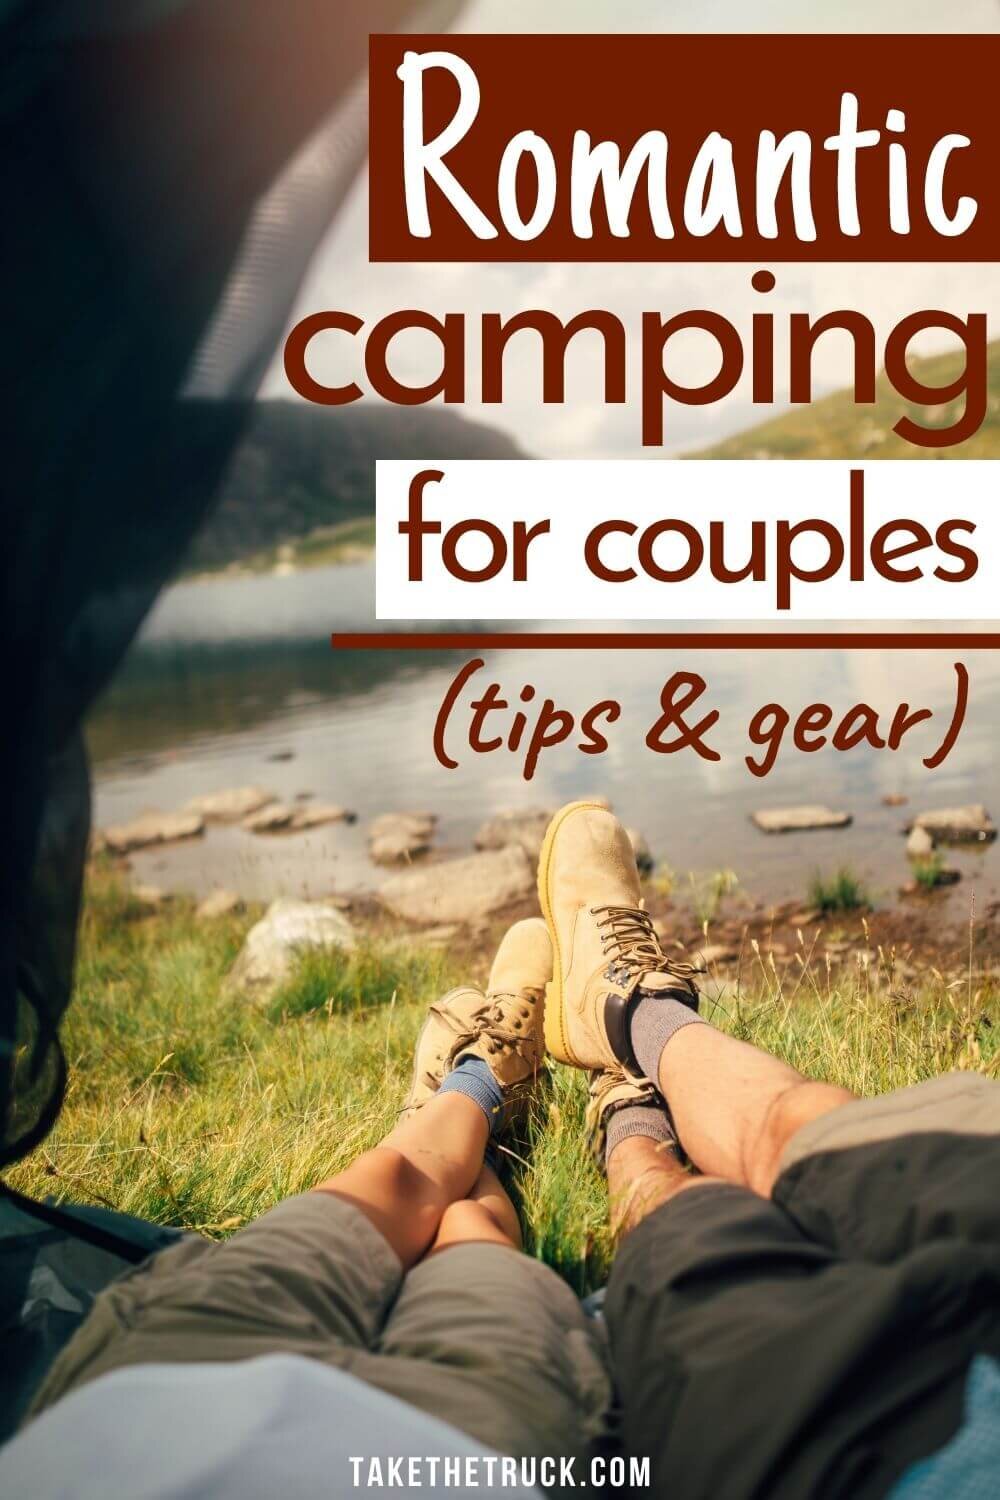 This post is about romantic camping for couples! Tips on planning the perfect camping date  night are given, from location to great mood-setting accessories. Up your romantic camping game!